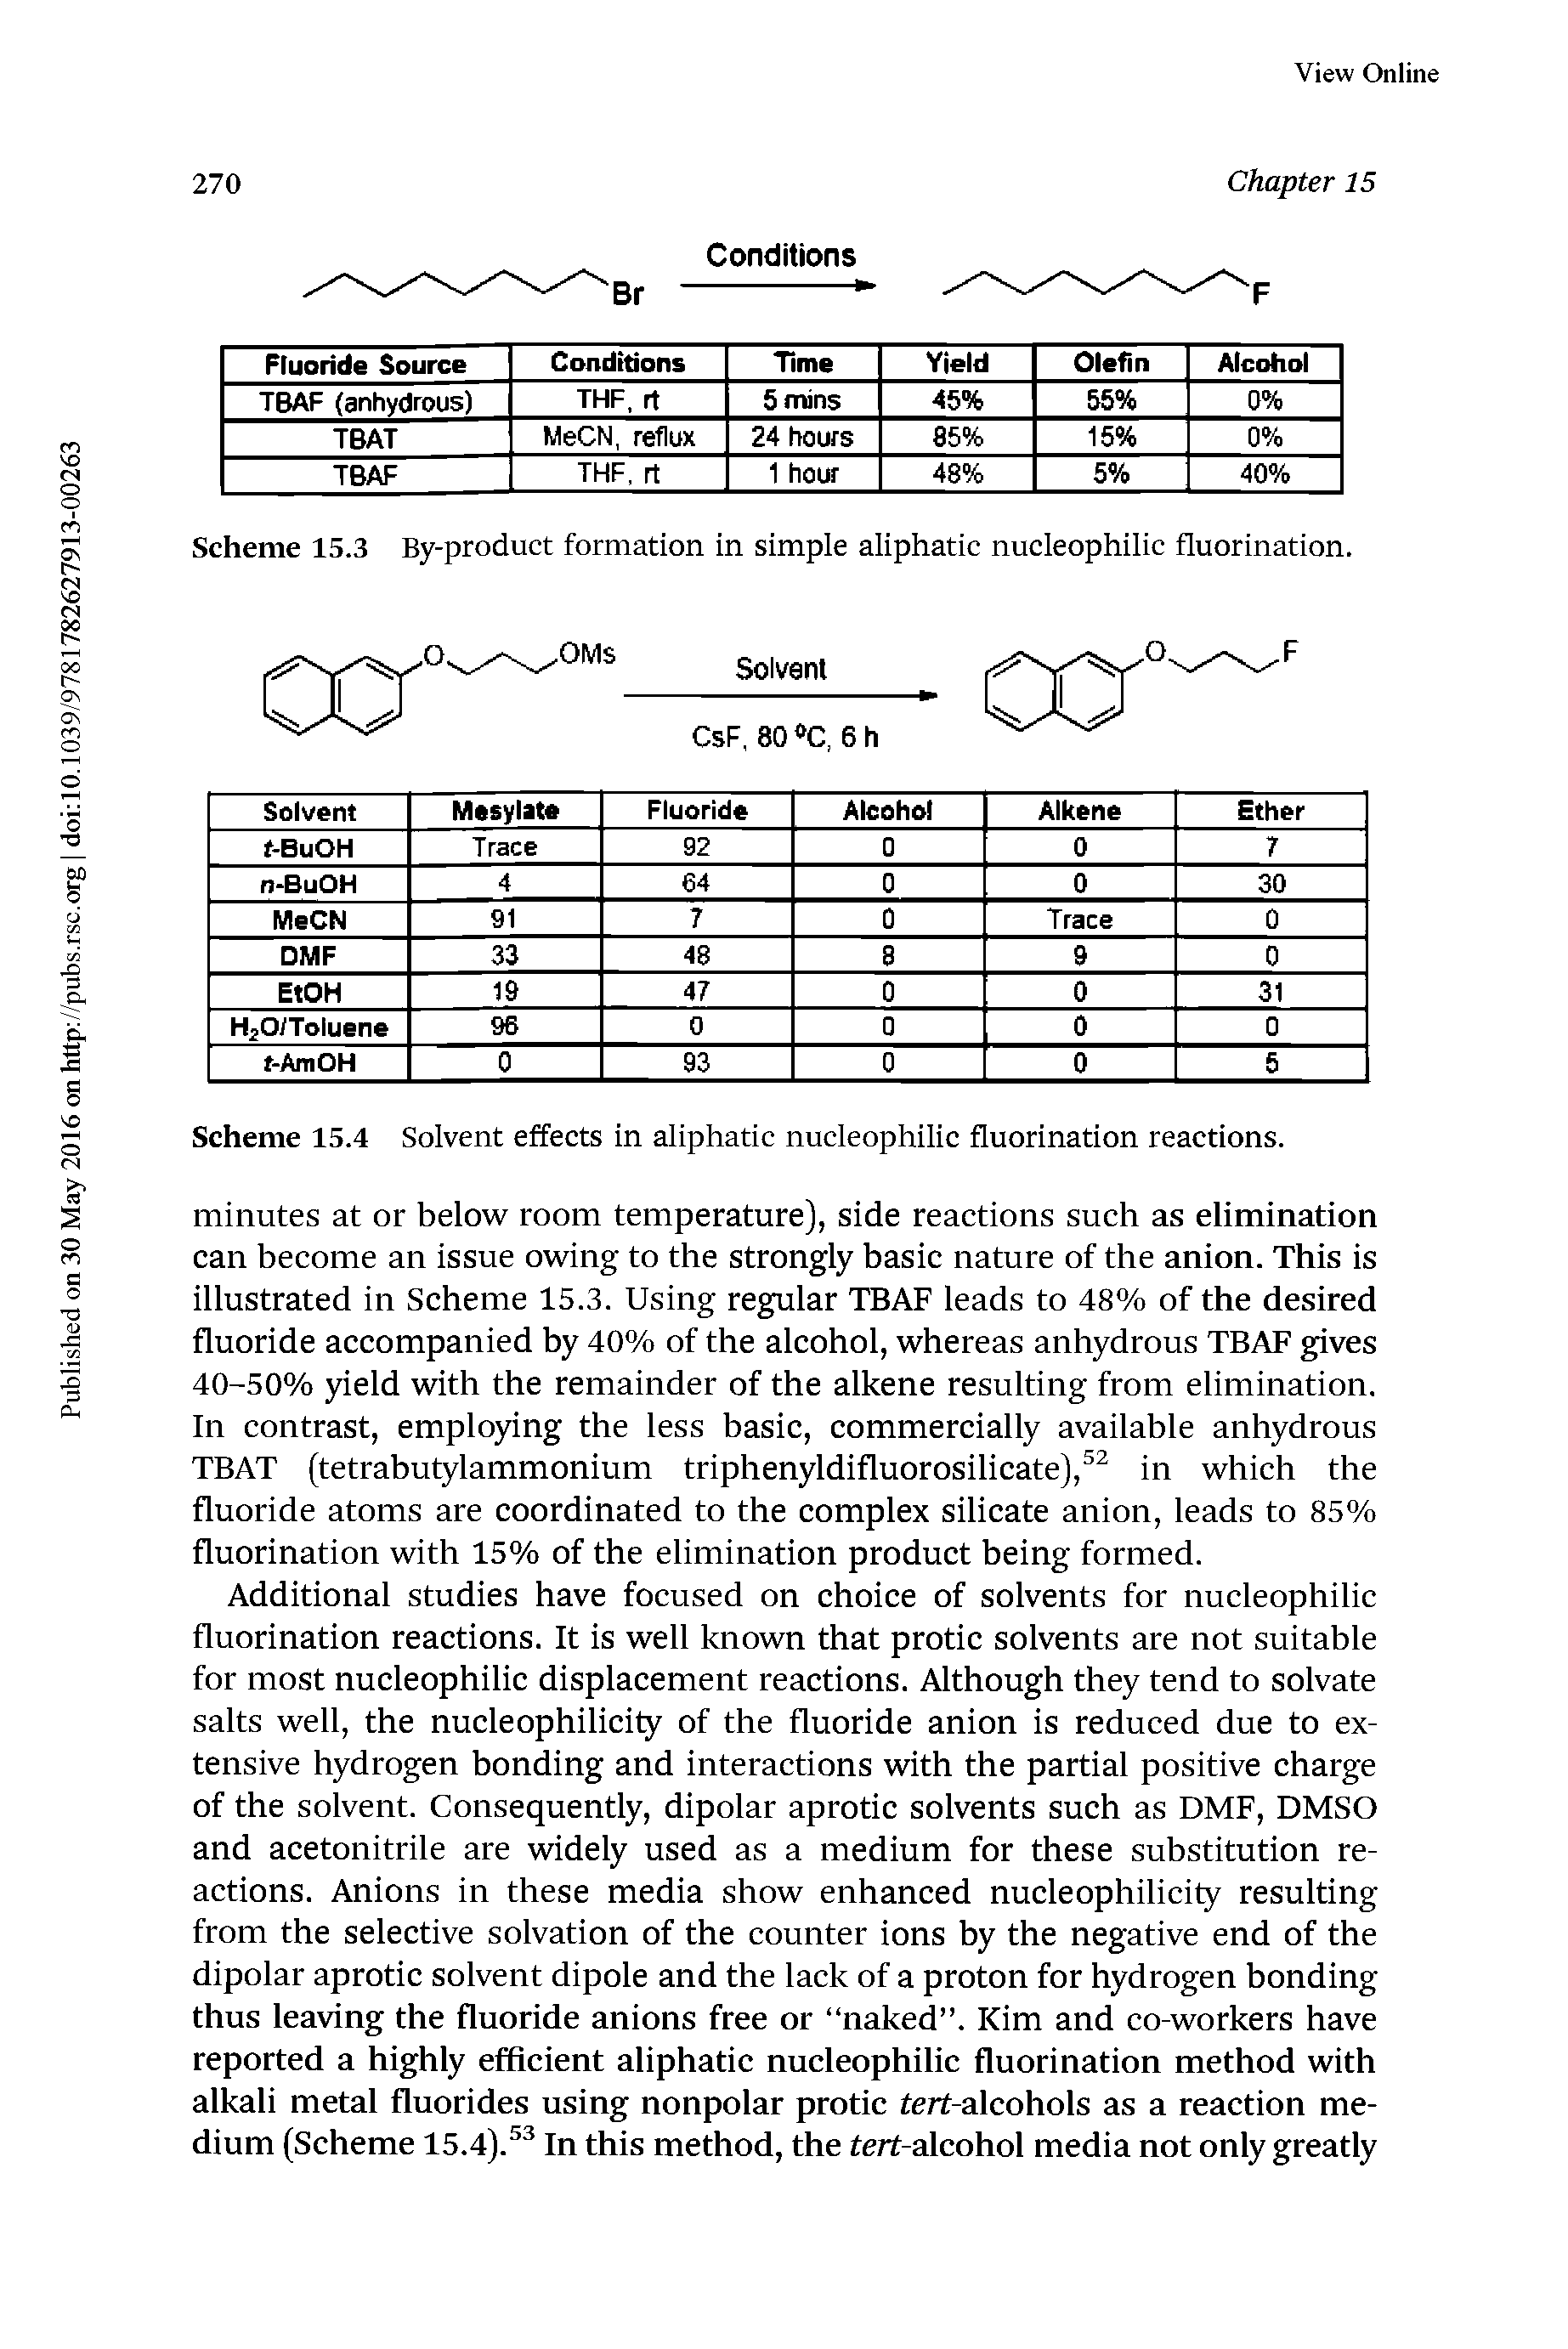 Scheme 15.4 Solvent effects in aliphatic nucleophilic fluorination reactions.